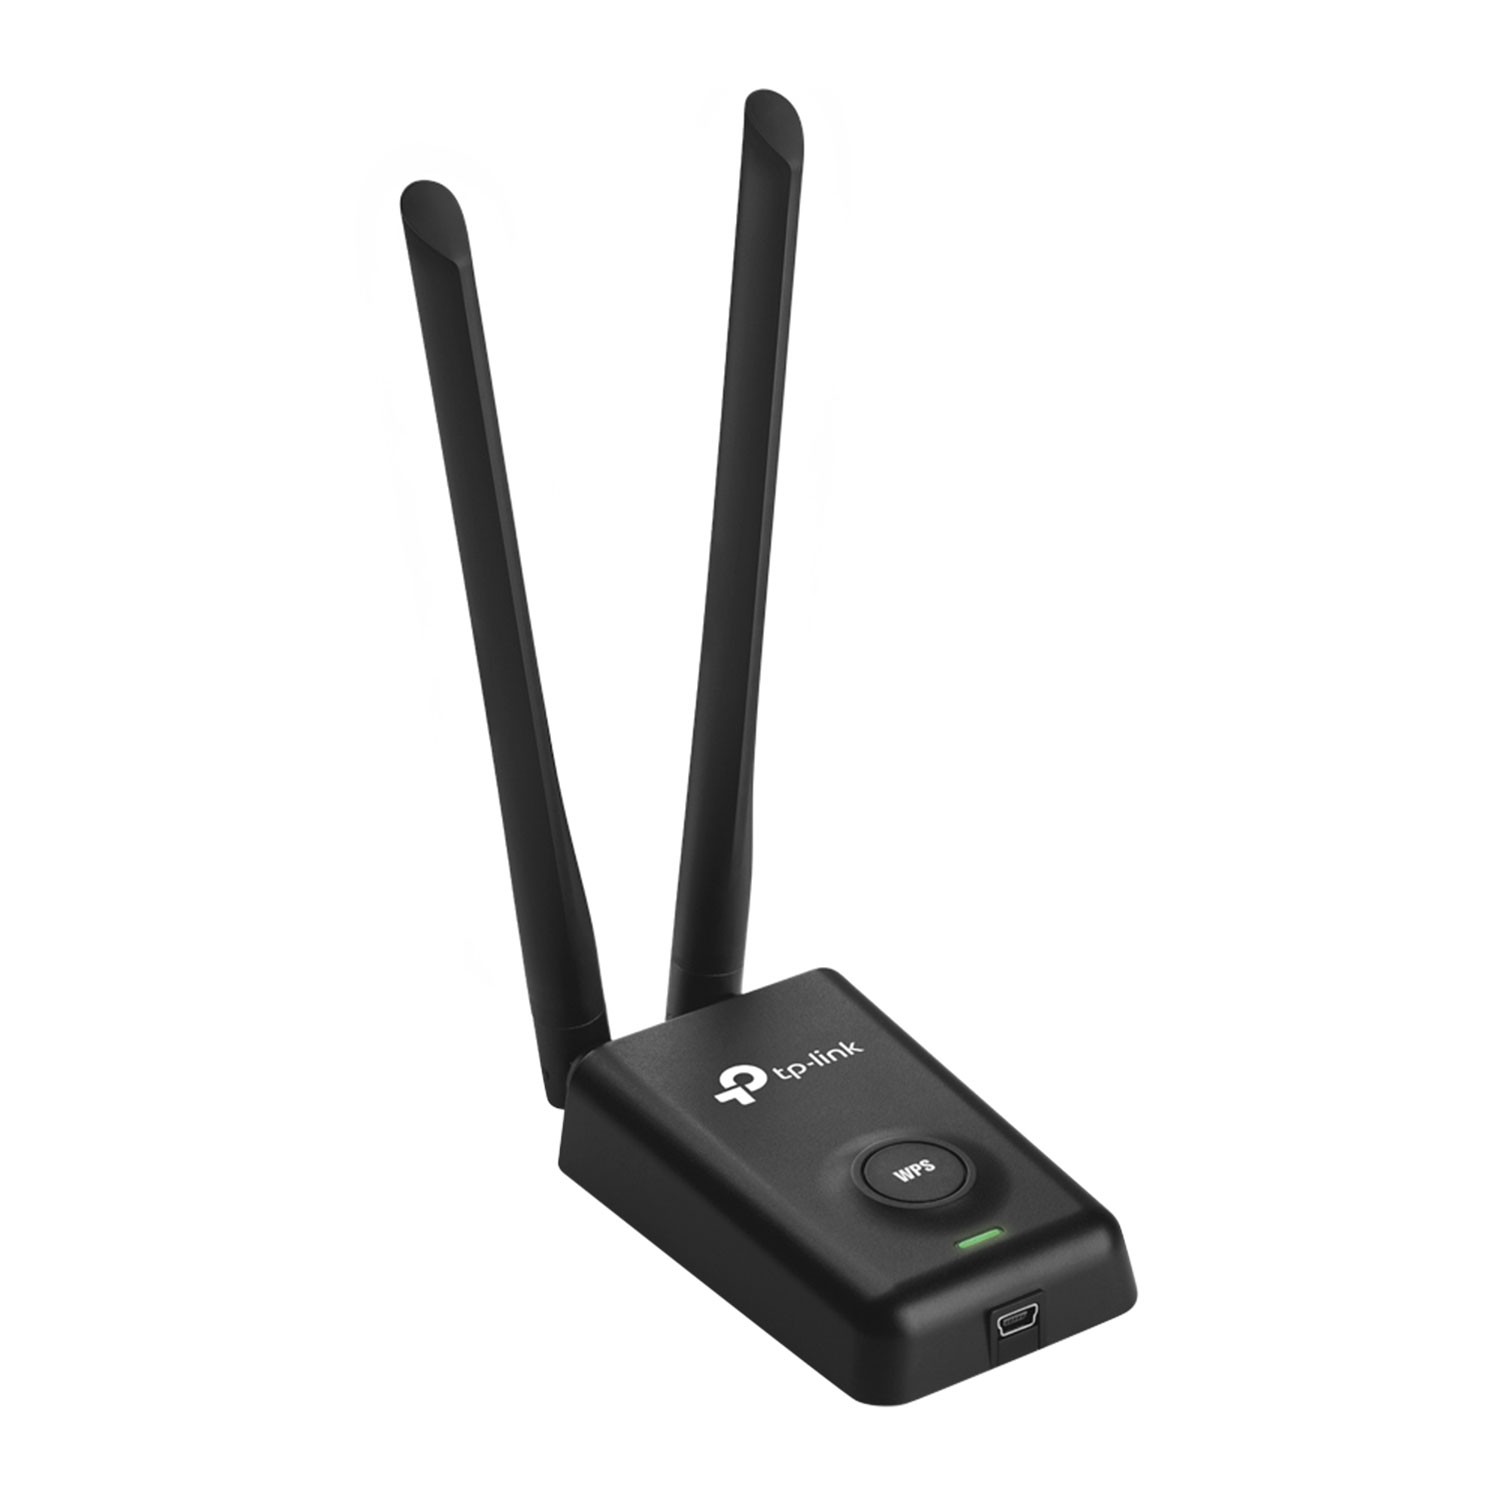 TP-LINK TL-WN8200ND v1 300Mbps High Power Wireless USB Adapter